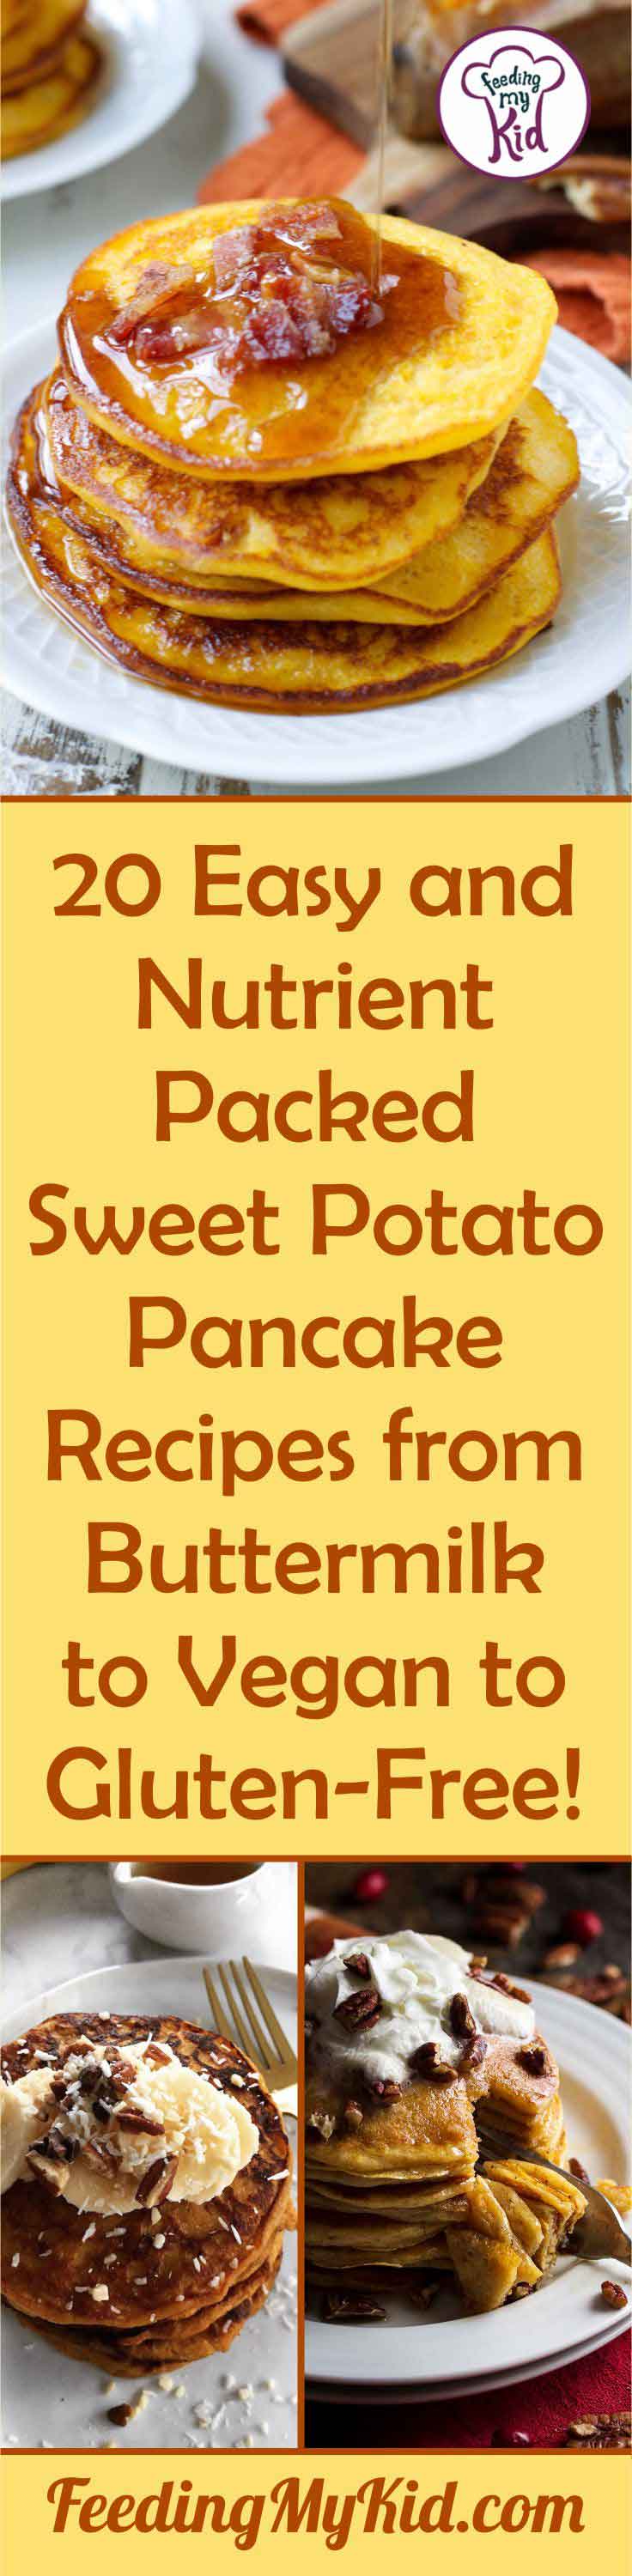 Sweet potatoes are sweet, delicious, and nutrient rich! They're the perfect substitute in many recipes. Try them out in some sweet potato pancakes.